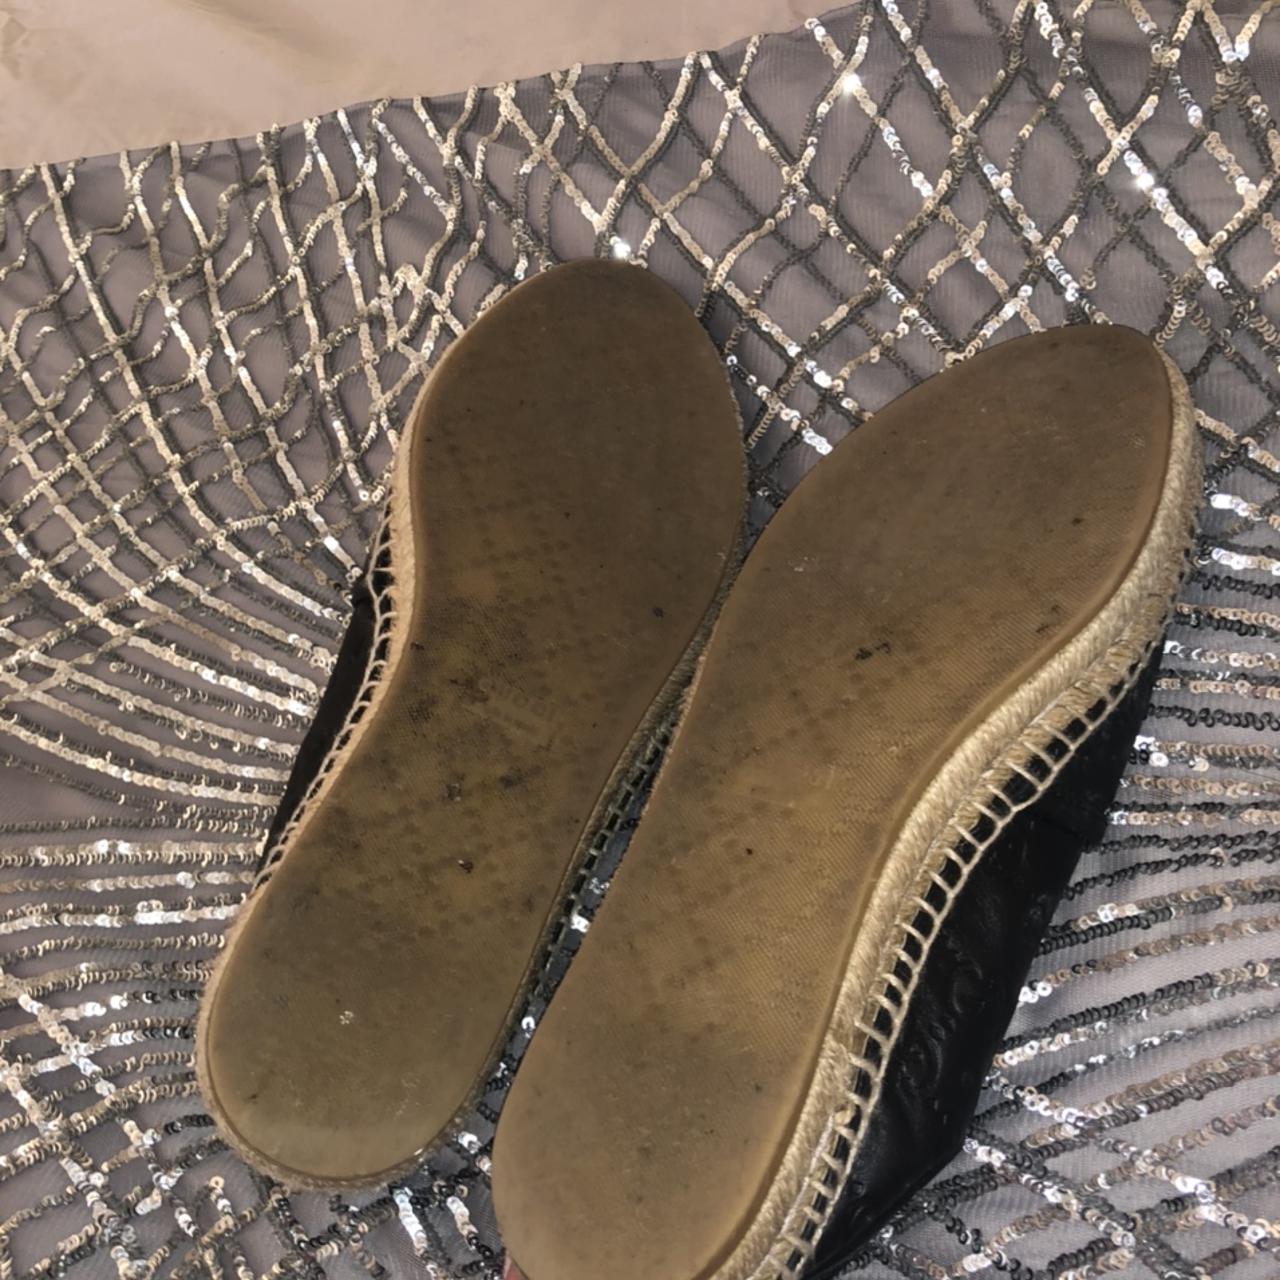 Authentic Gucci espadrilles ❤️ worn twice, comfy and - Depop